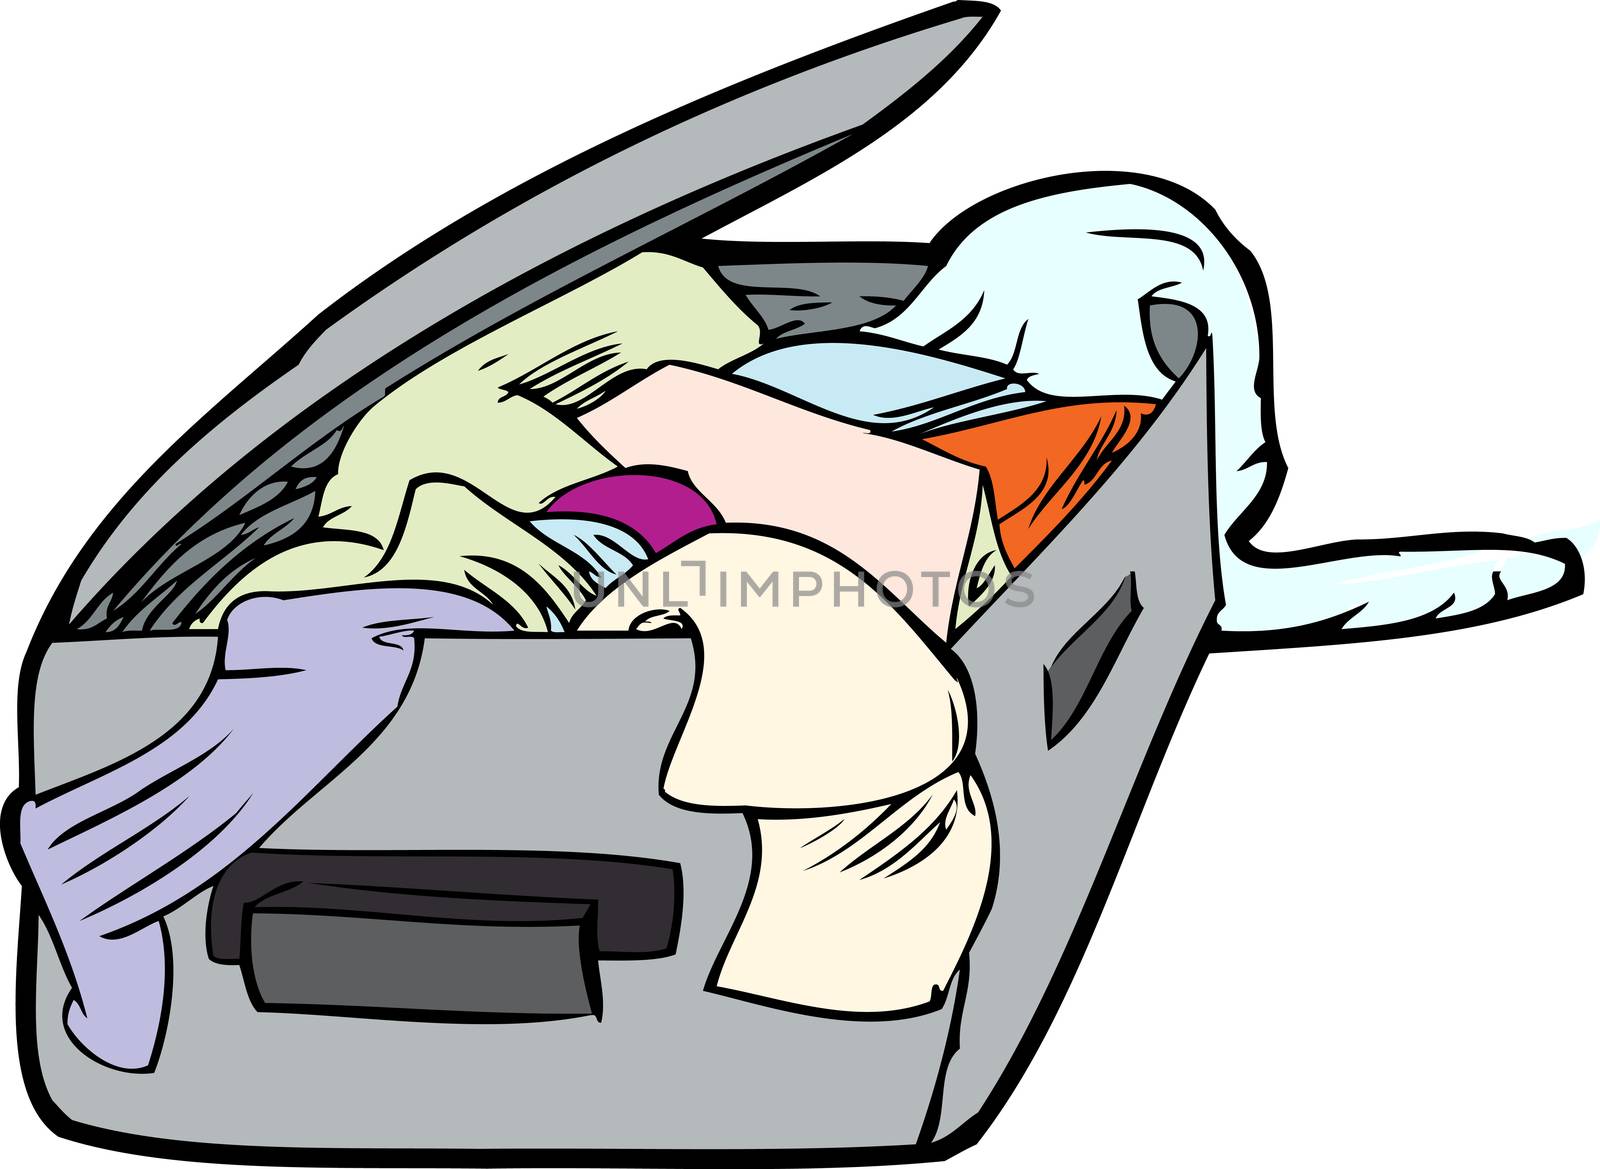 Cartoon messy open suitcase with clothing inside over white